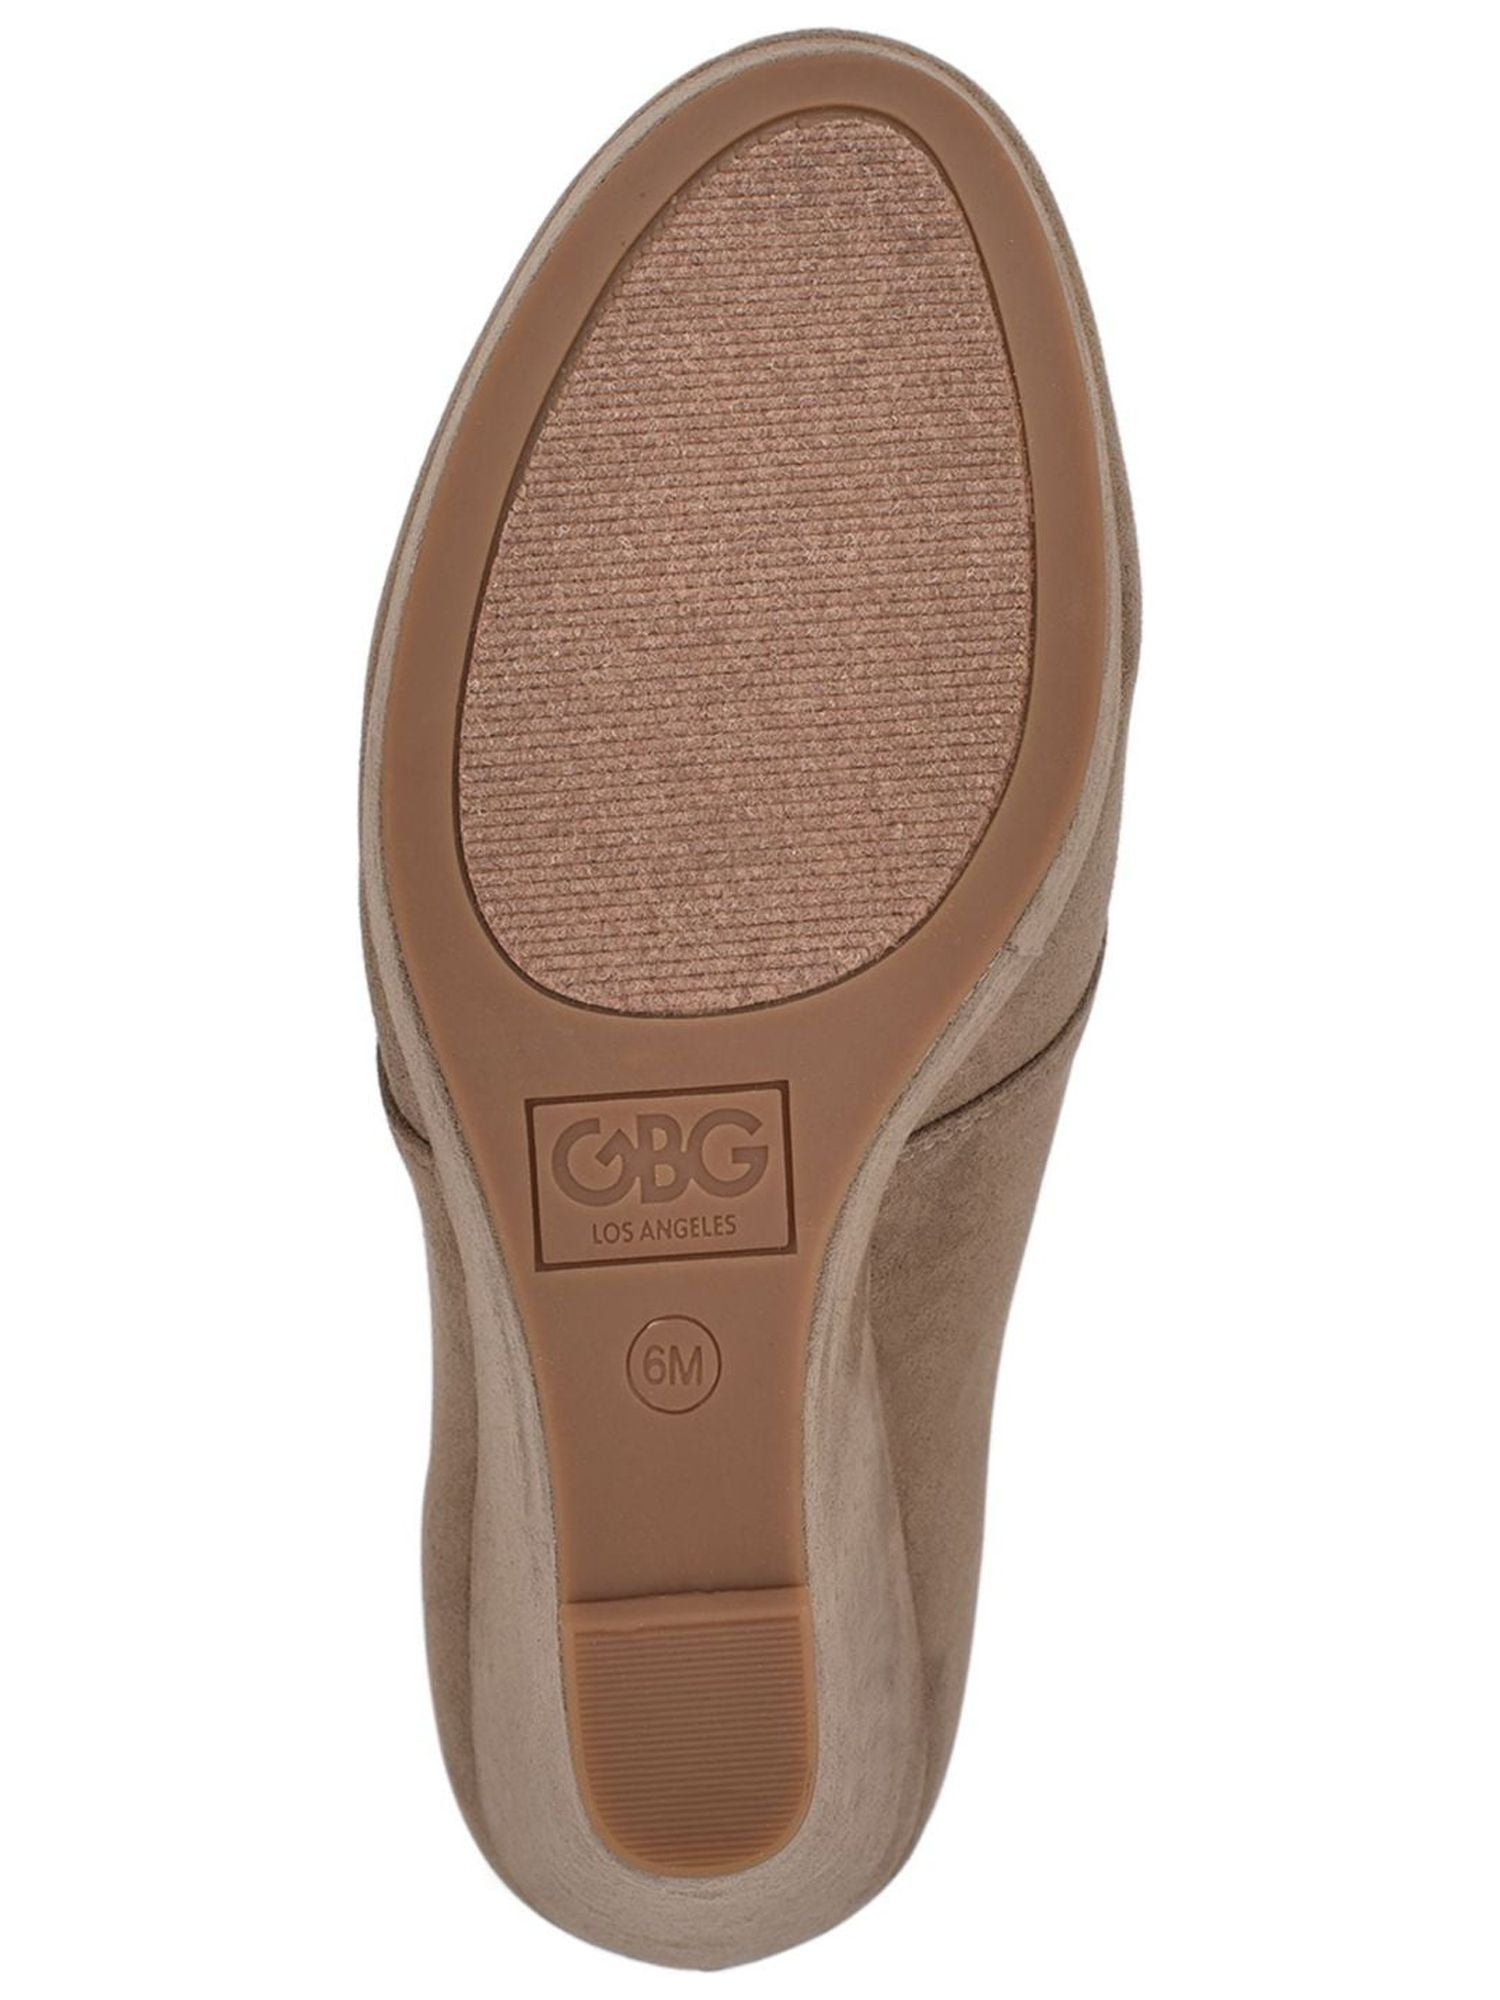 GBG LOS ANGELES Womens Taupe Beige 1